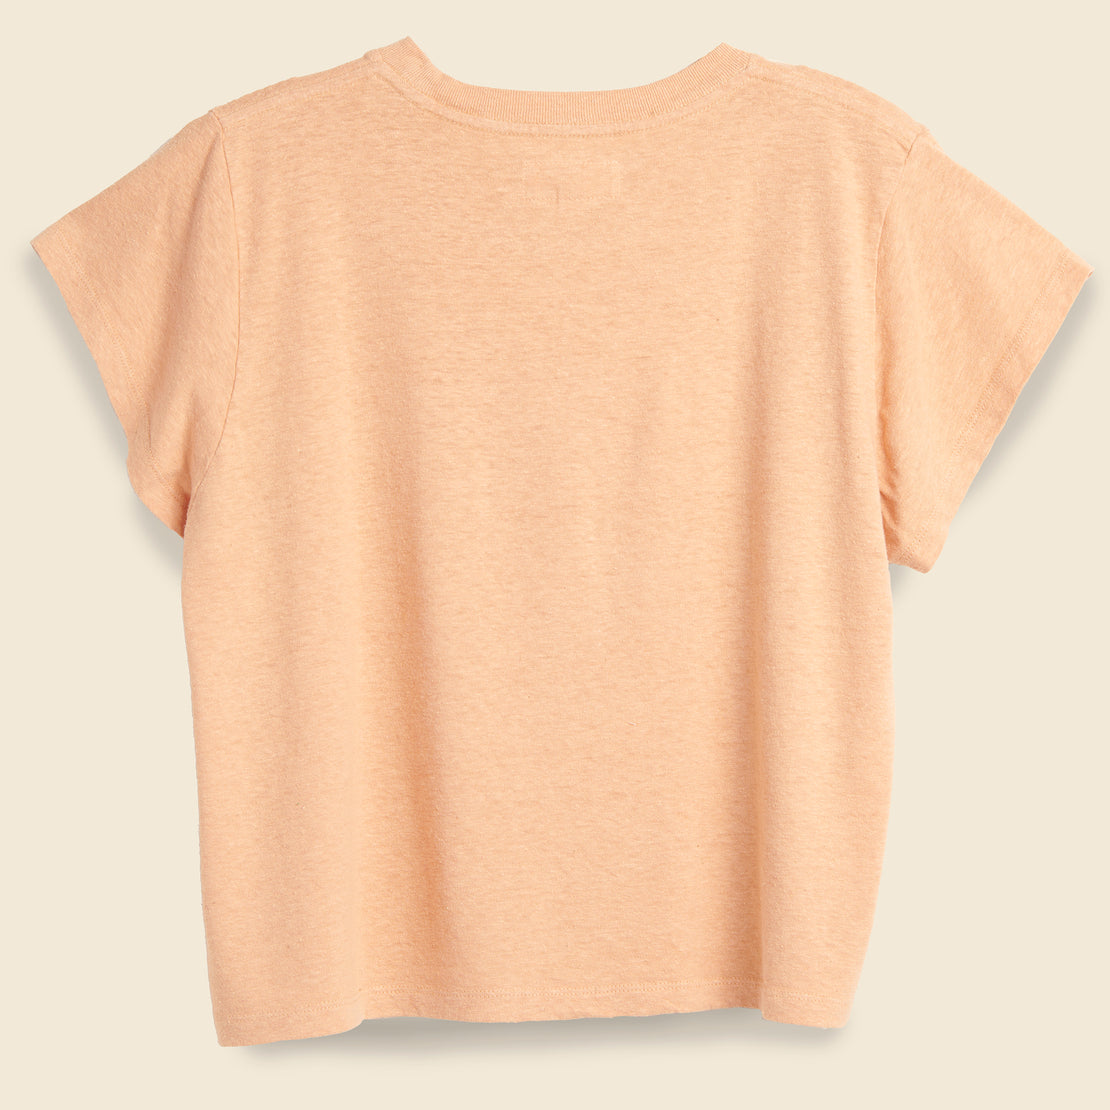 Q Tee - Tutu - Mollusk - STAG Provisions - W - Tops - S/S Tee